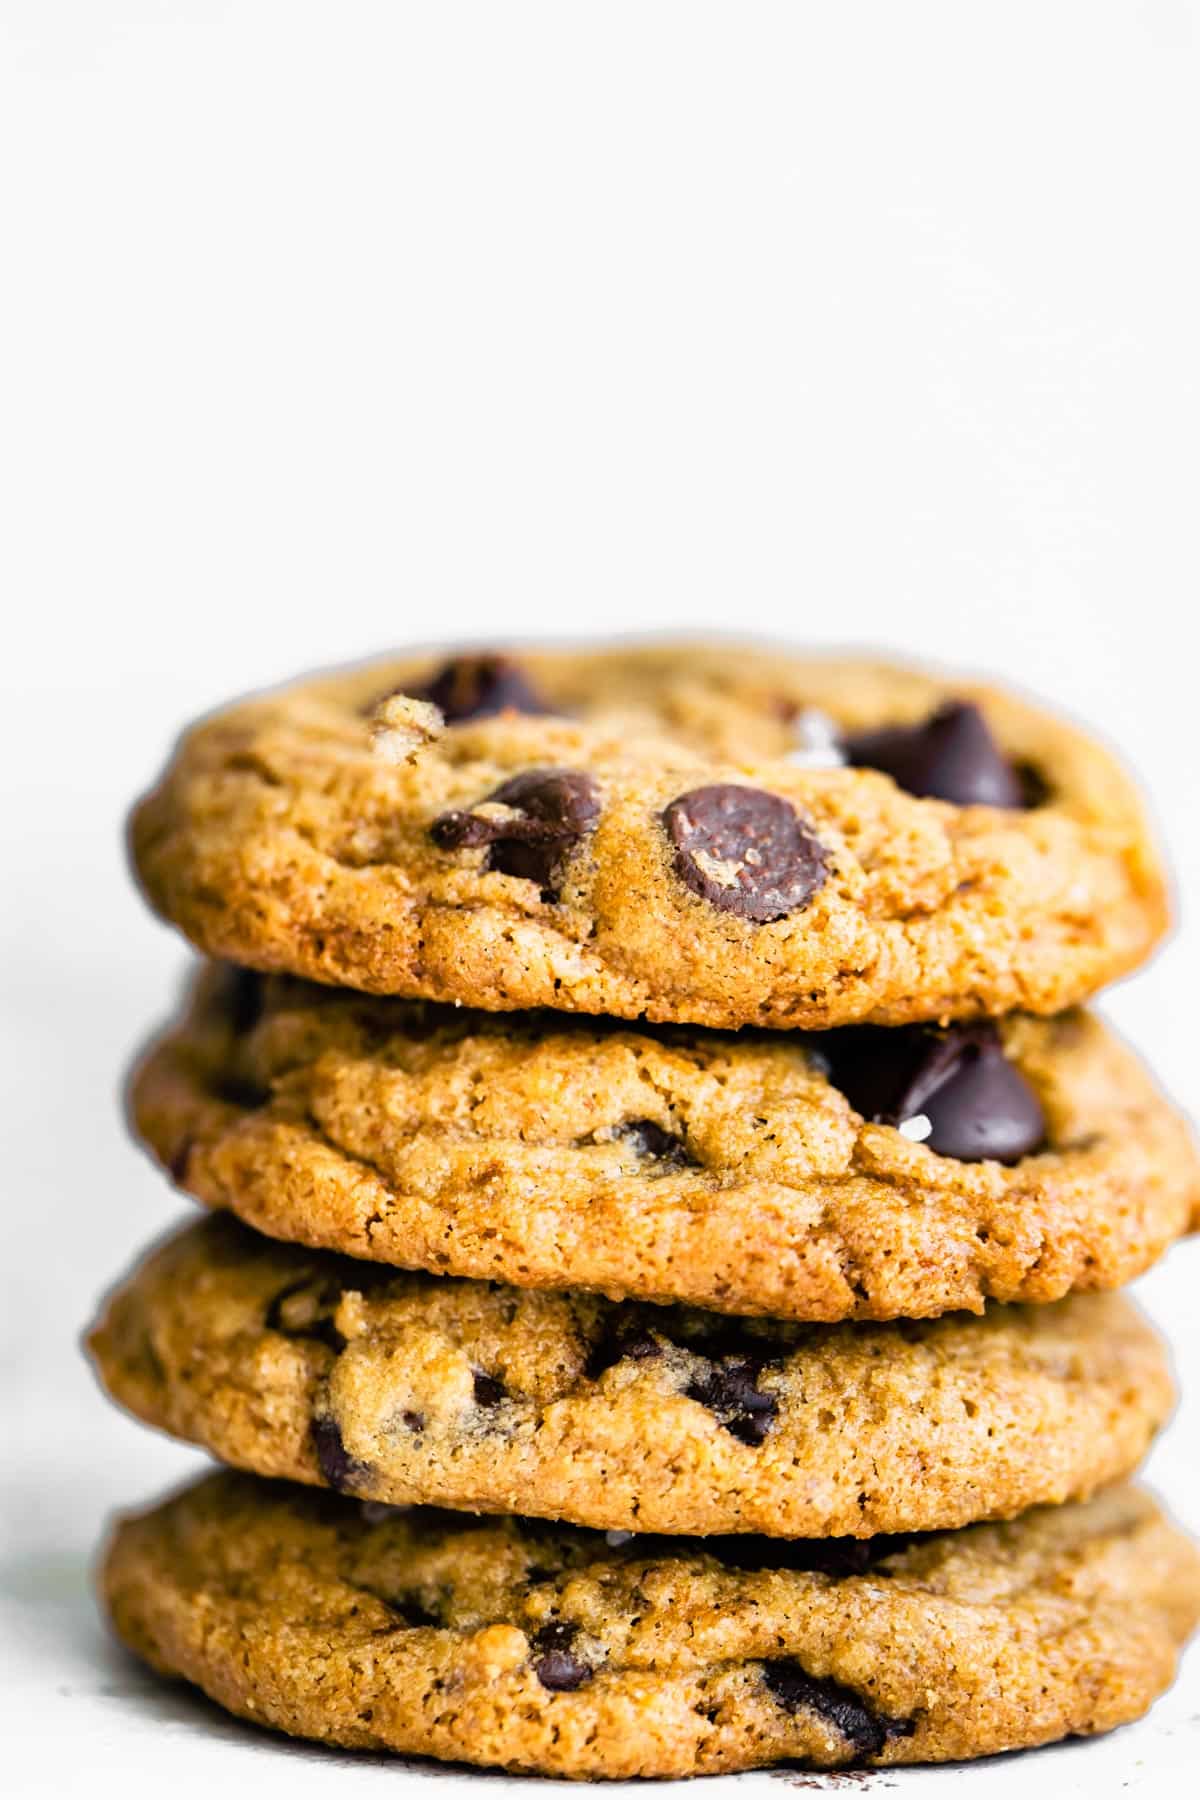 A stack of four gluten free chocolate chip cookies on a white background.